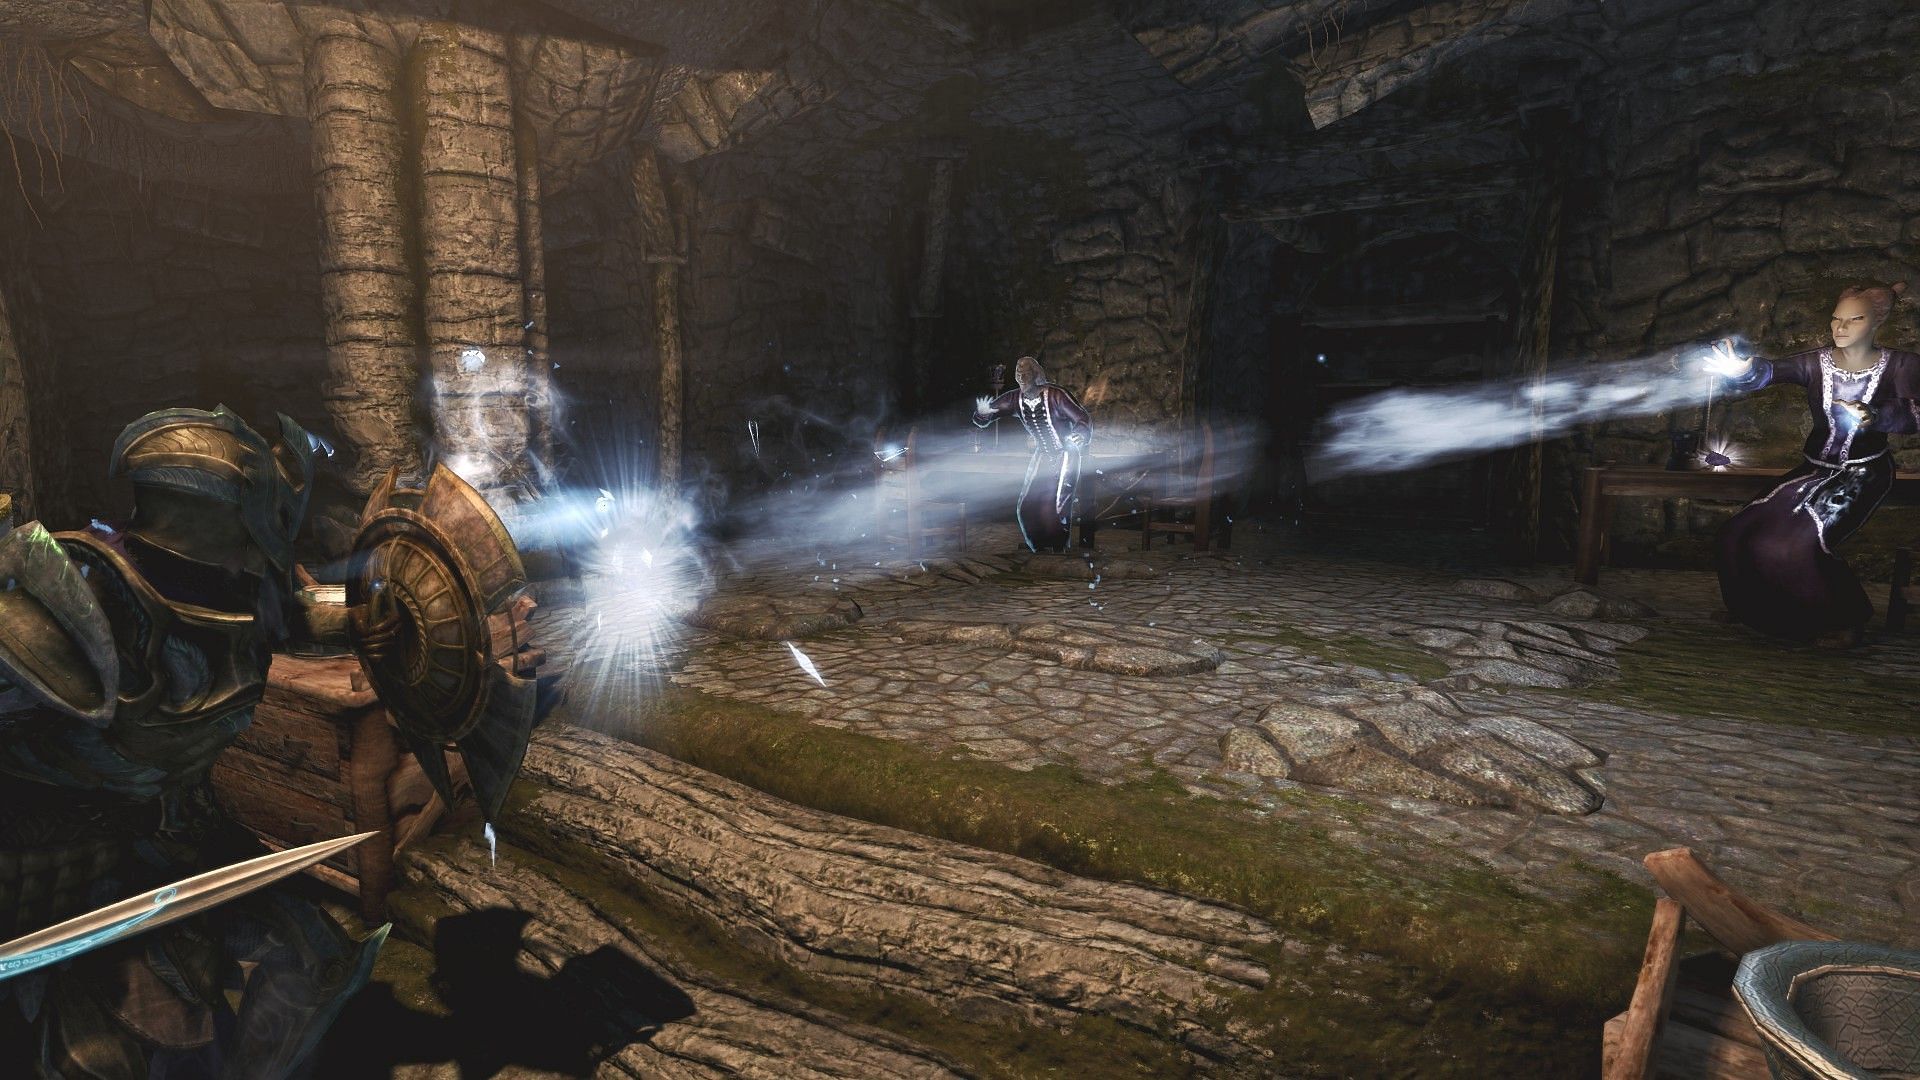 The Spellbreaker grants a layer of magic ward when the shield is raised (Image via Nexusmods)